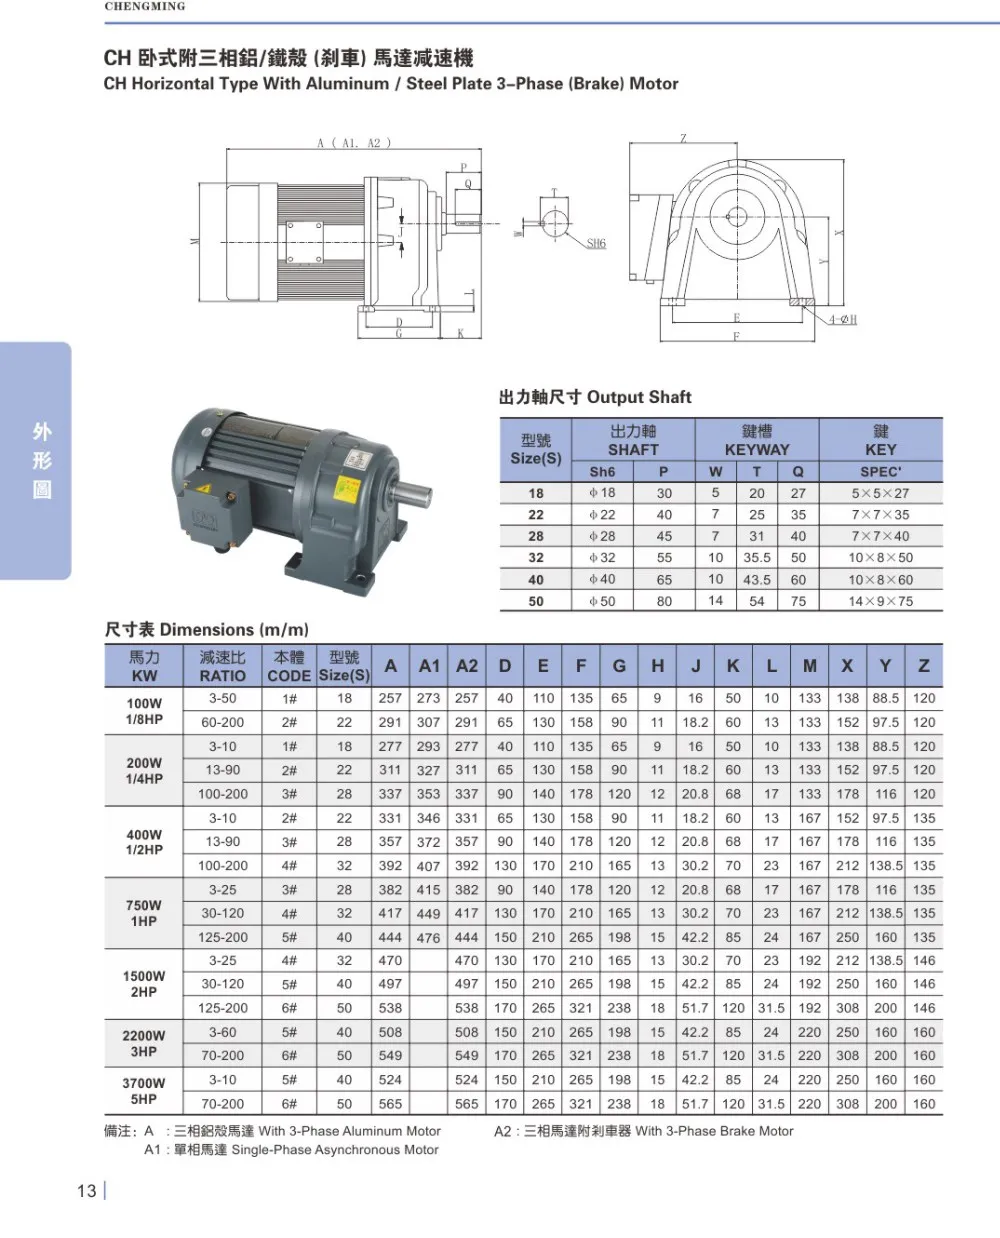 Good quality factory directly 60 rpm gear motor 528nm geared box with Ce Certificates